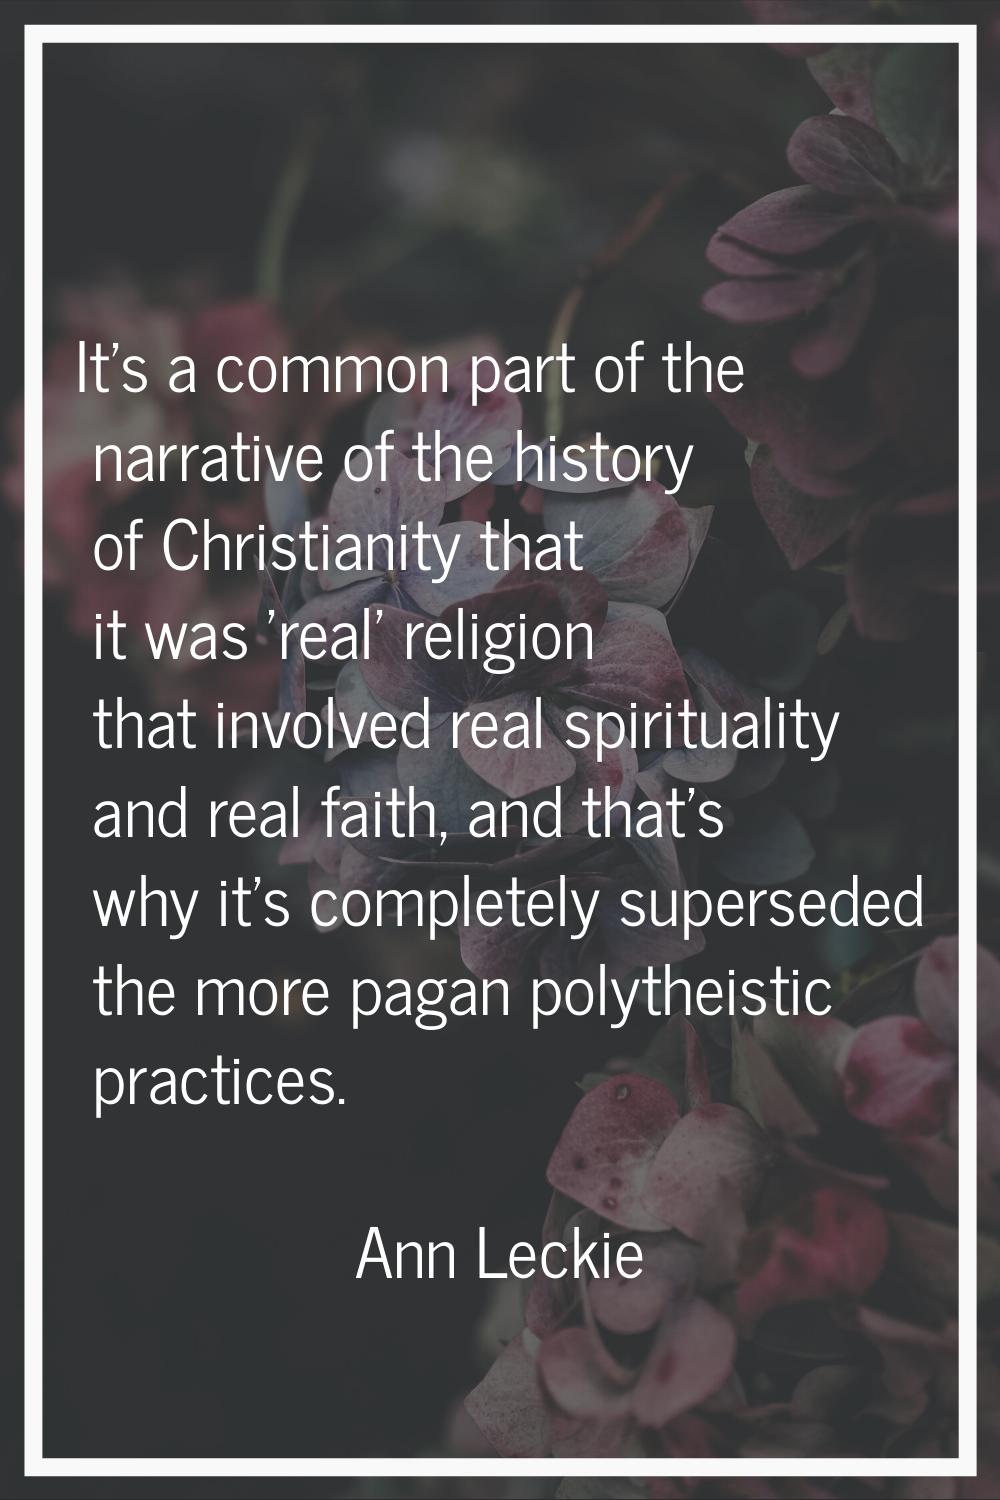 It's a common part of the narrative of the history of Christianity that it was 'real' religion that